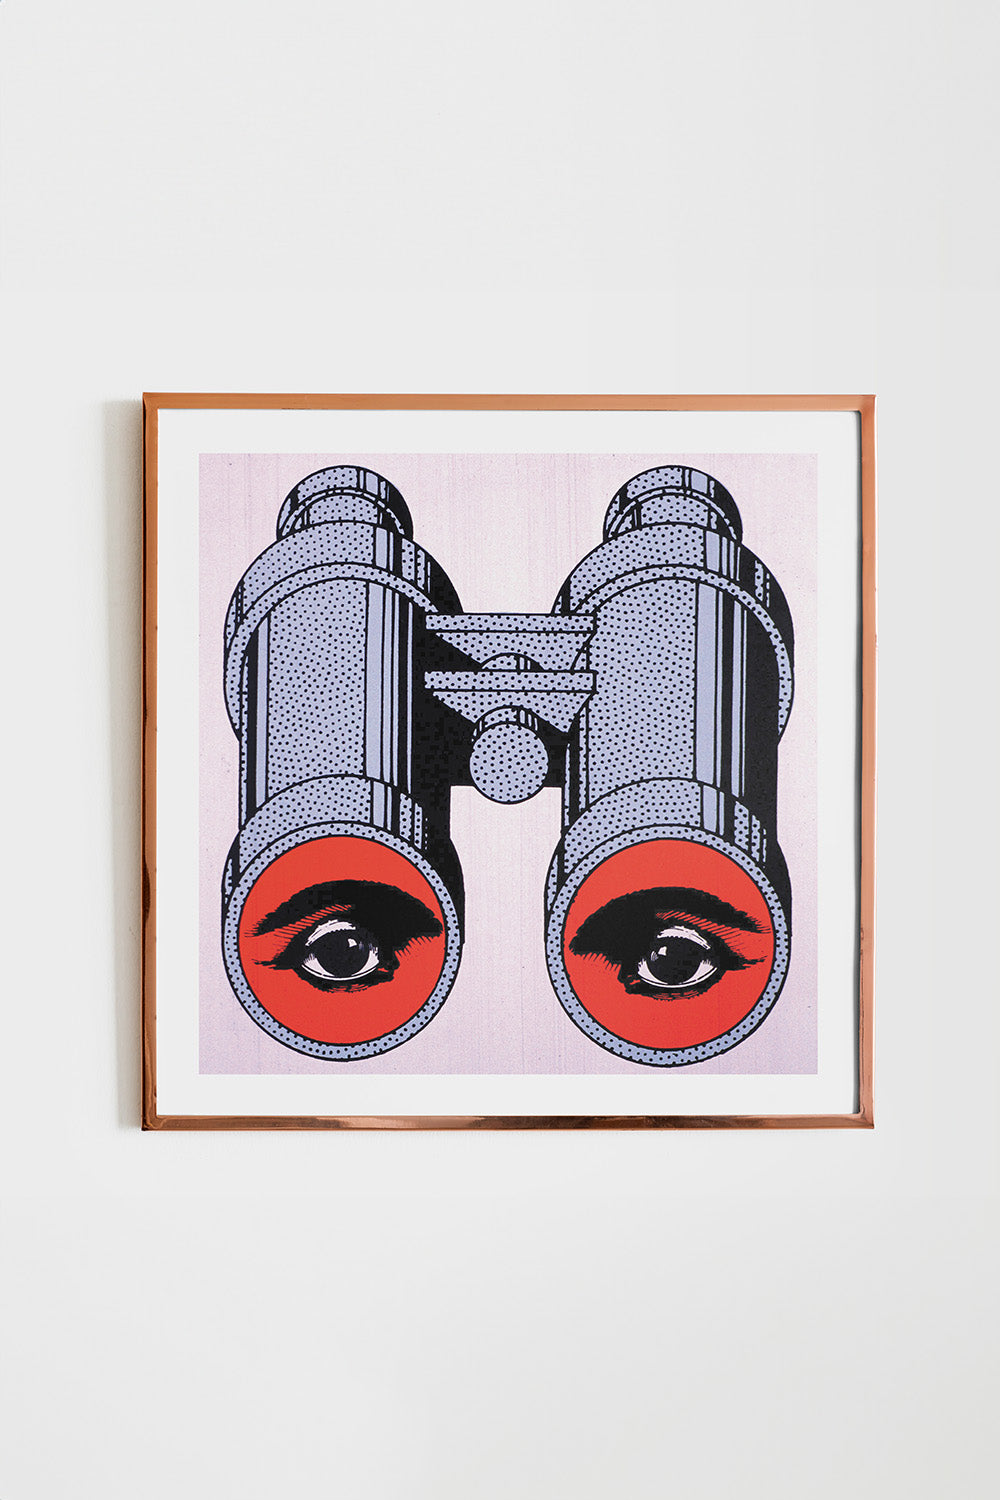 Square pop art of binoculars with illustrated eyes on a purple background.